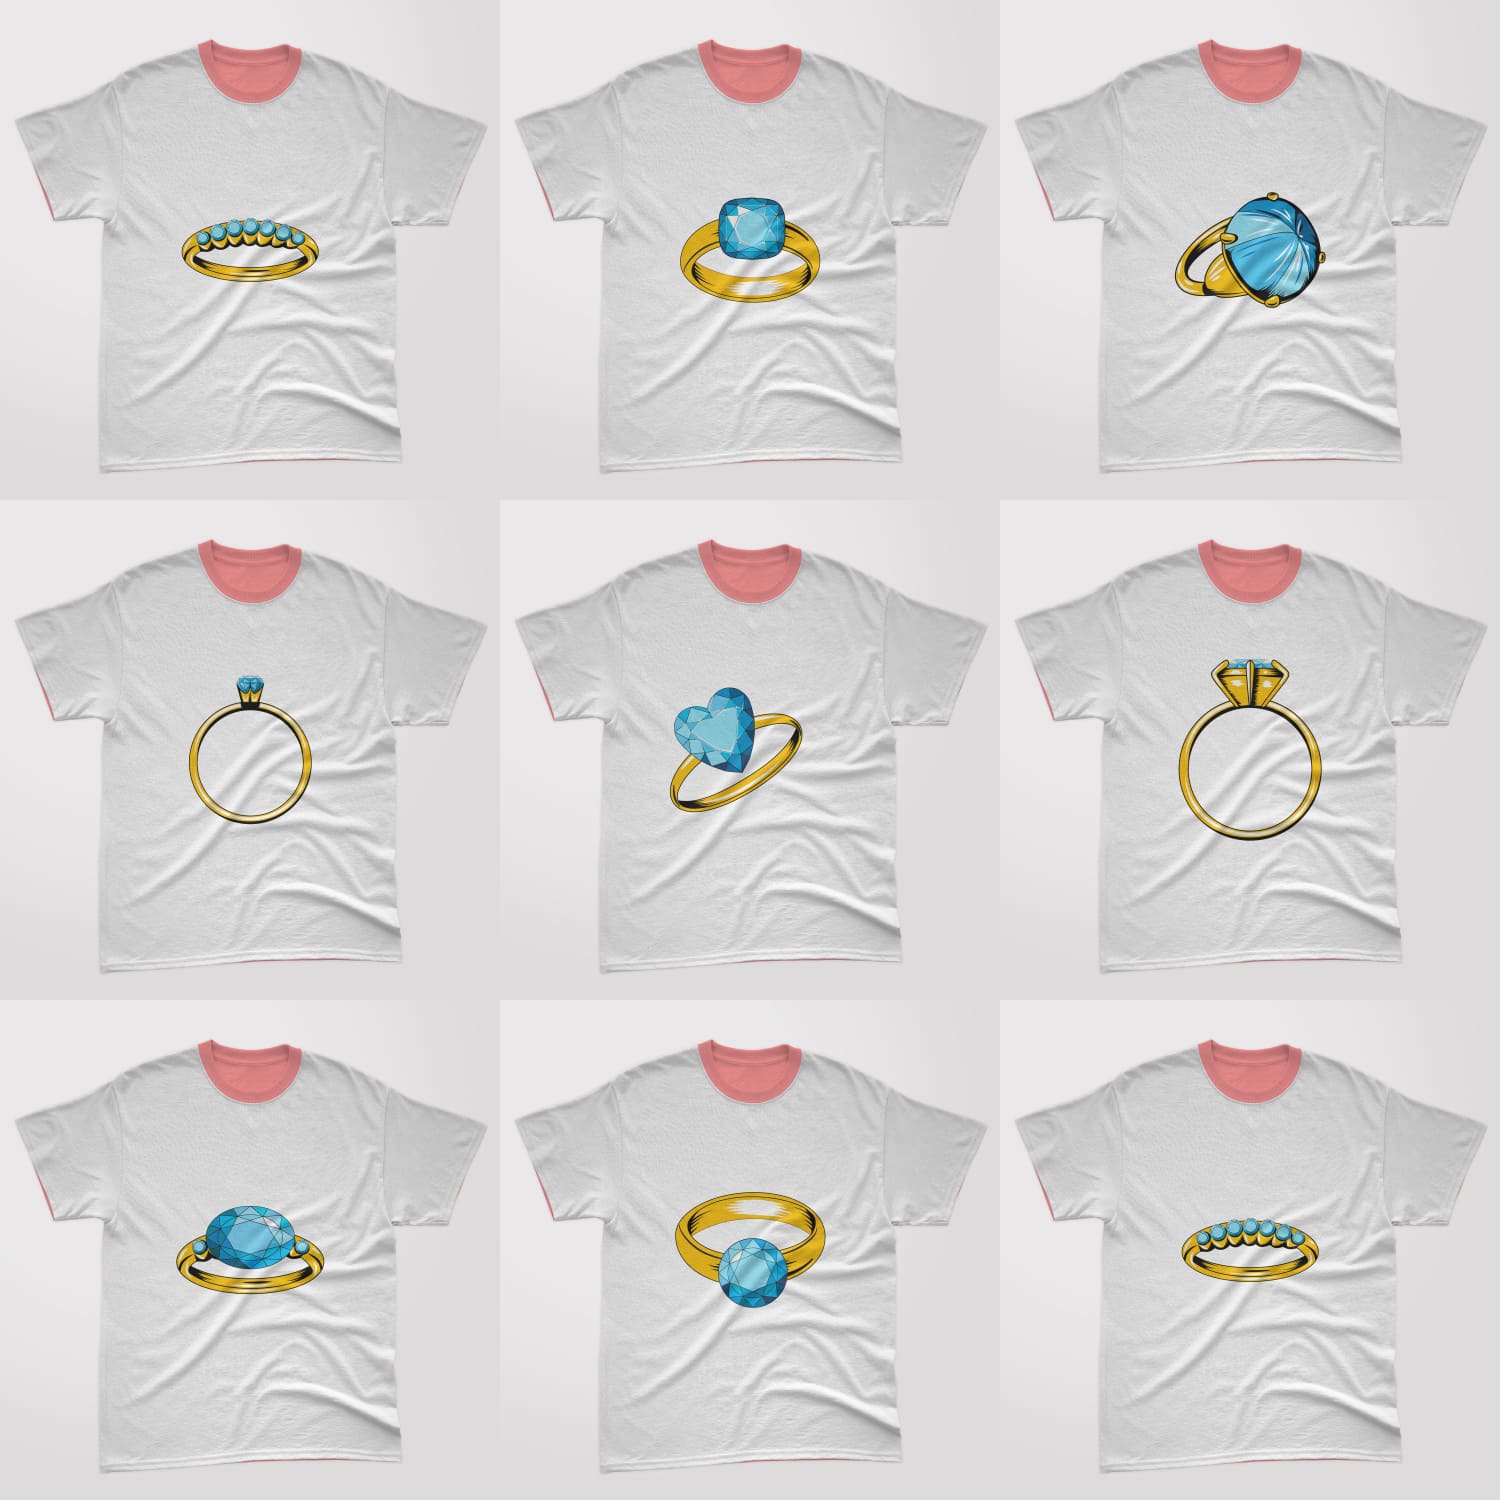 Bundle of t-shirt images with adorable diamond ring prints.